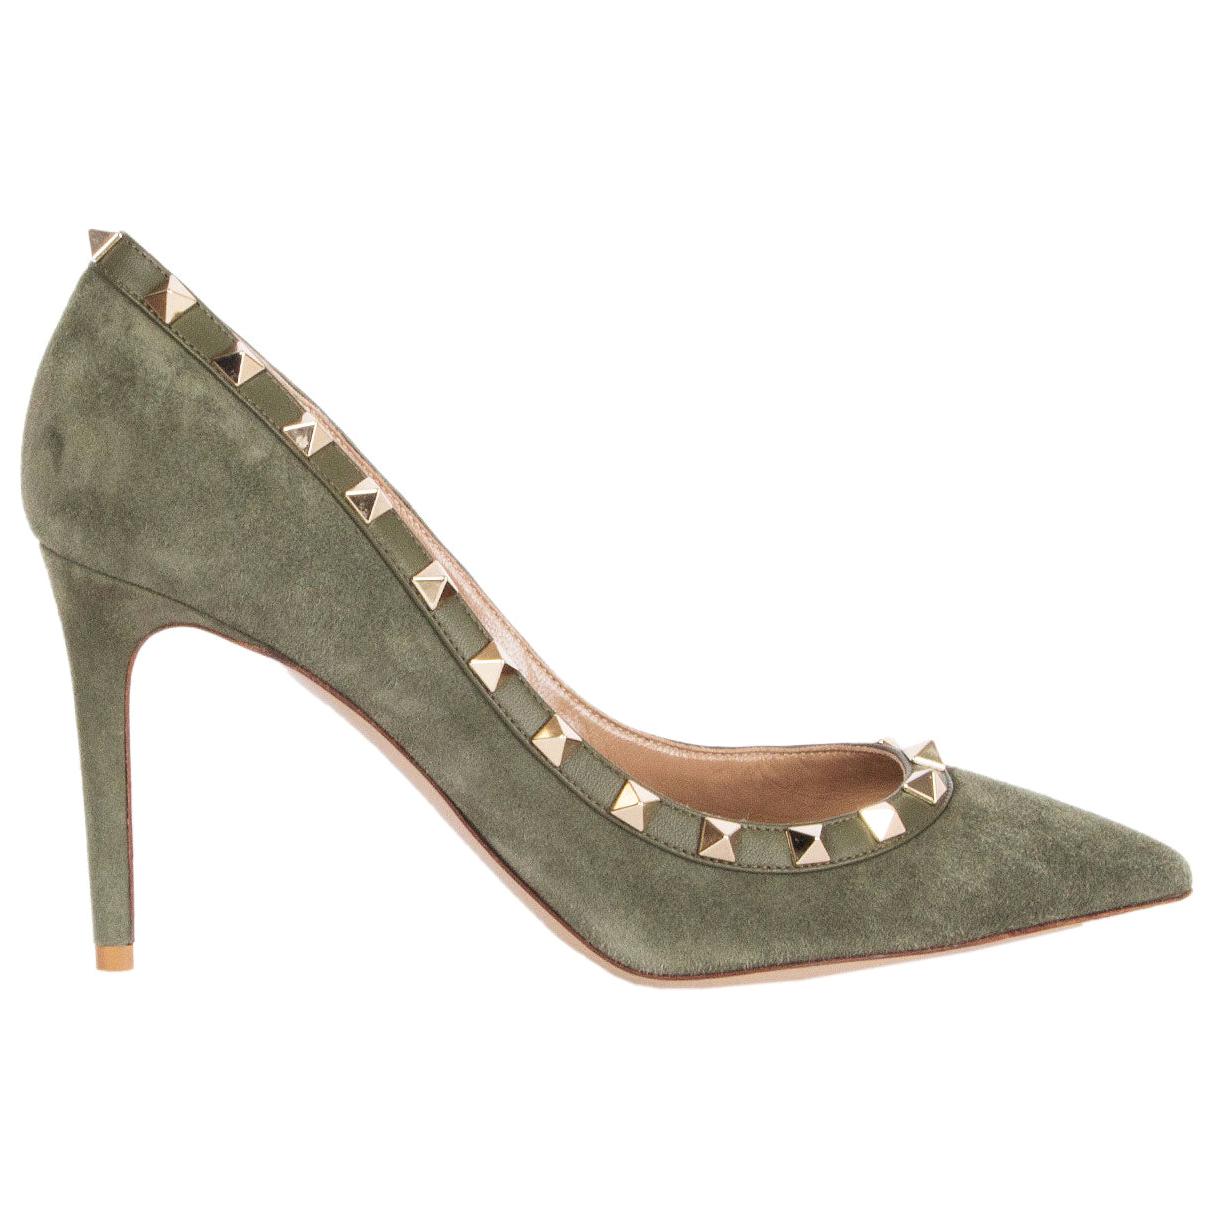 VALENTINO green suede ROCKSTUD 85 POINTED-TOE Pumps Shoes 39